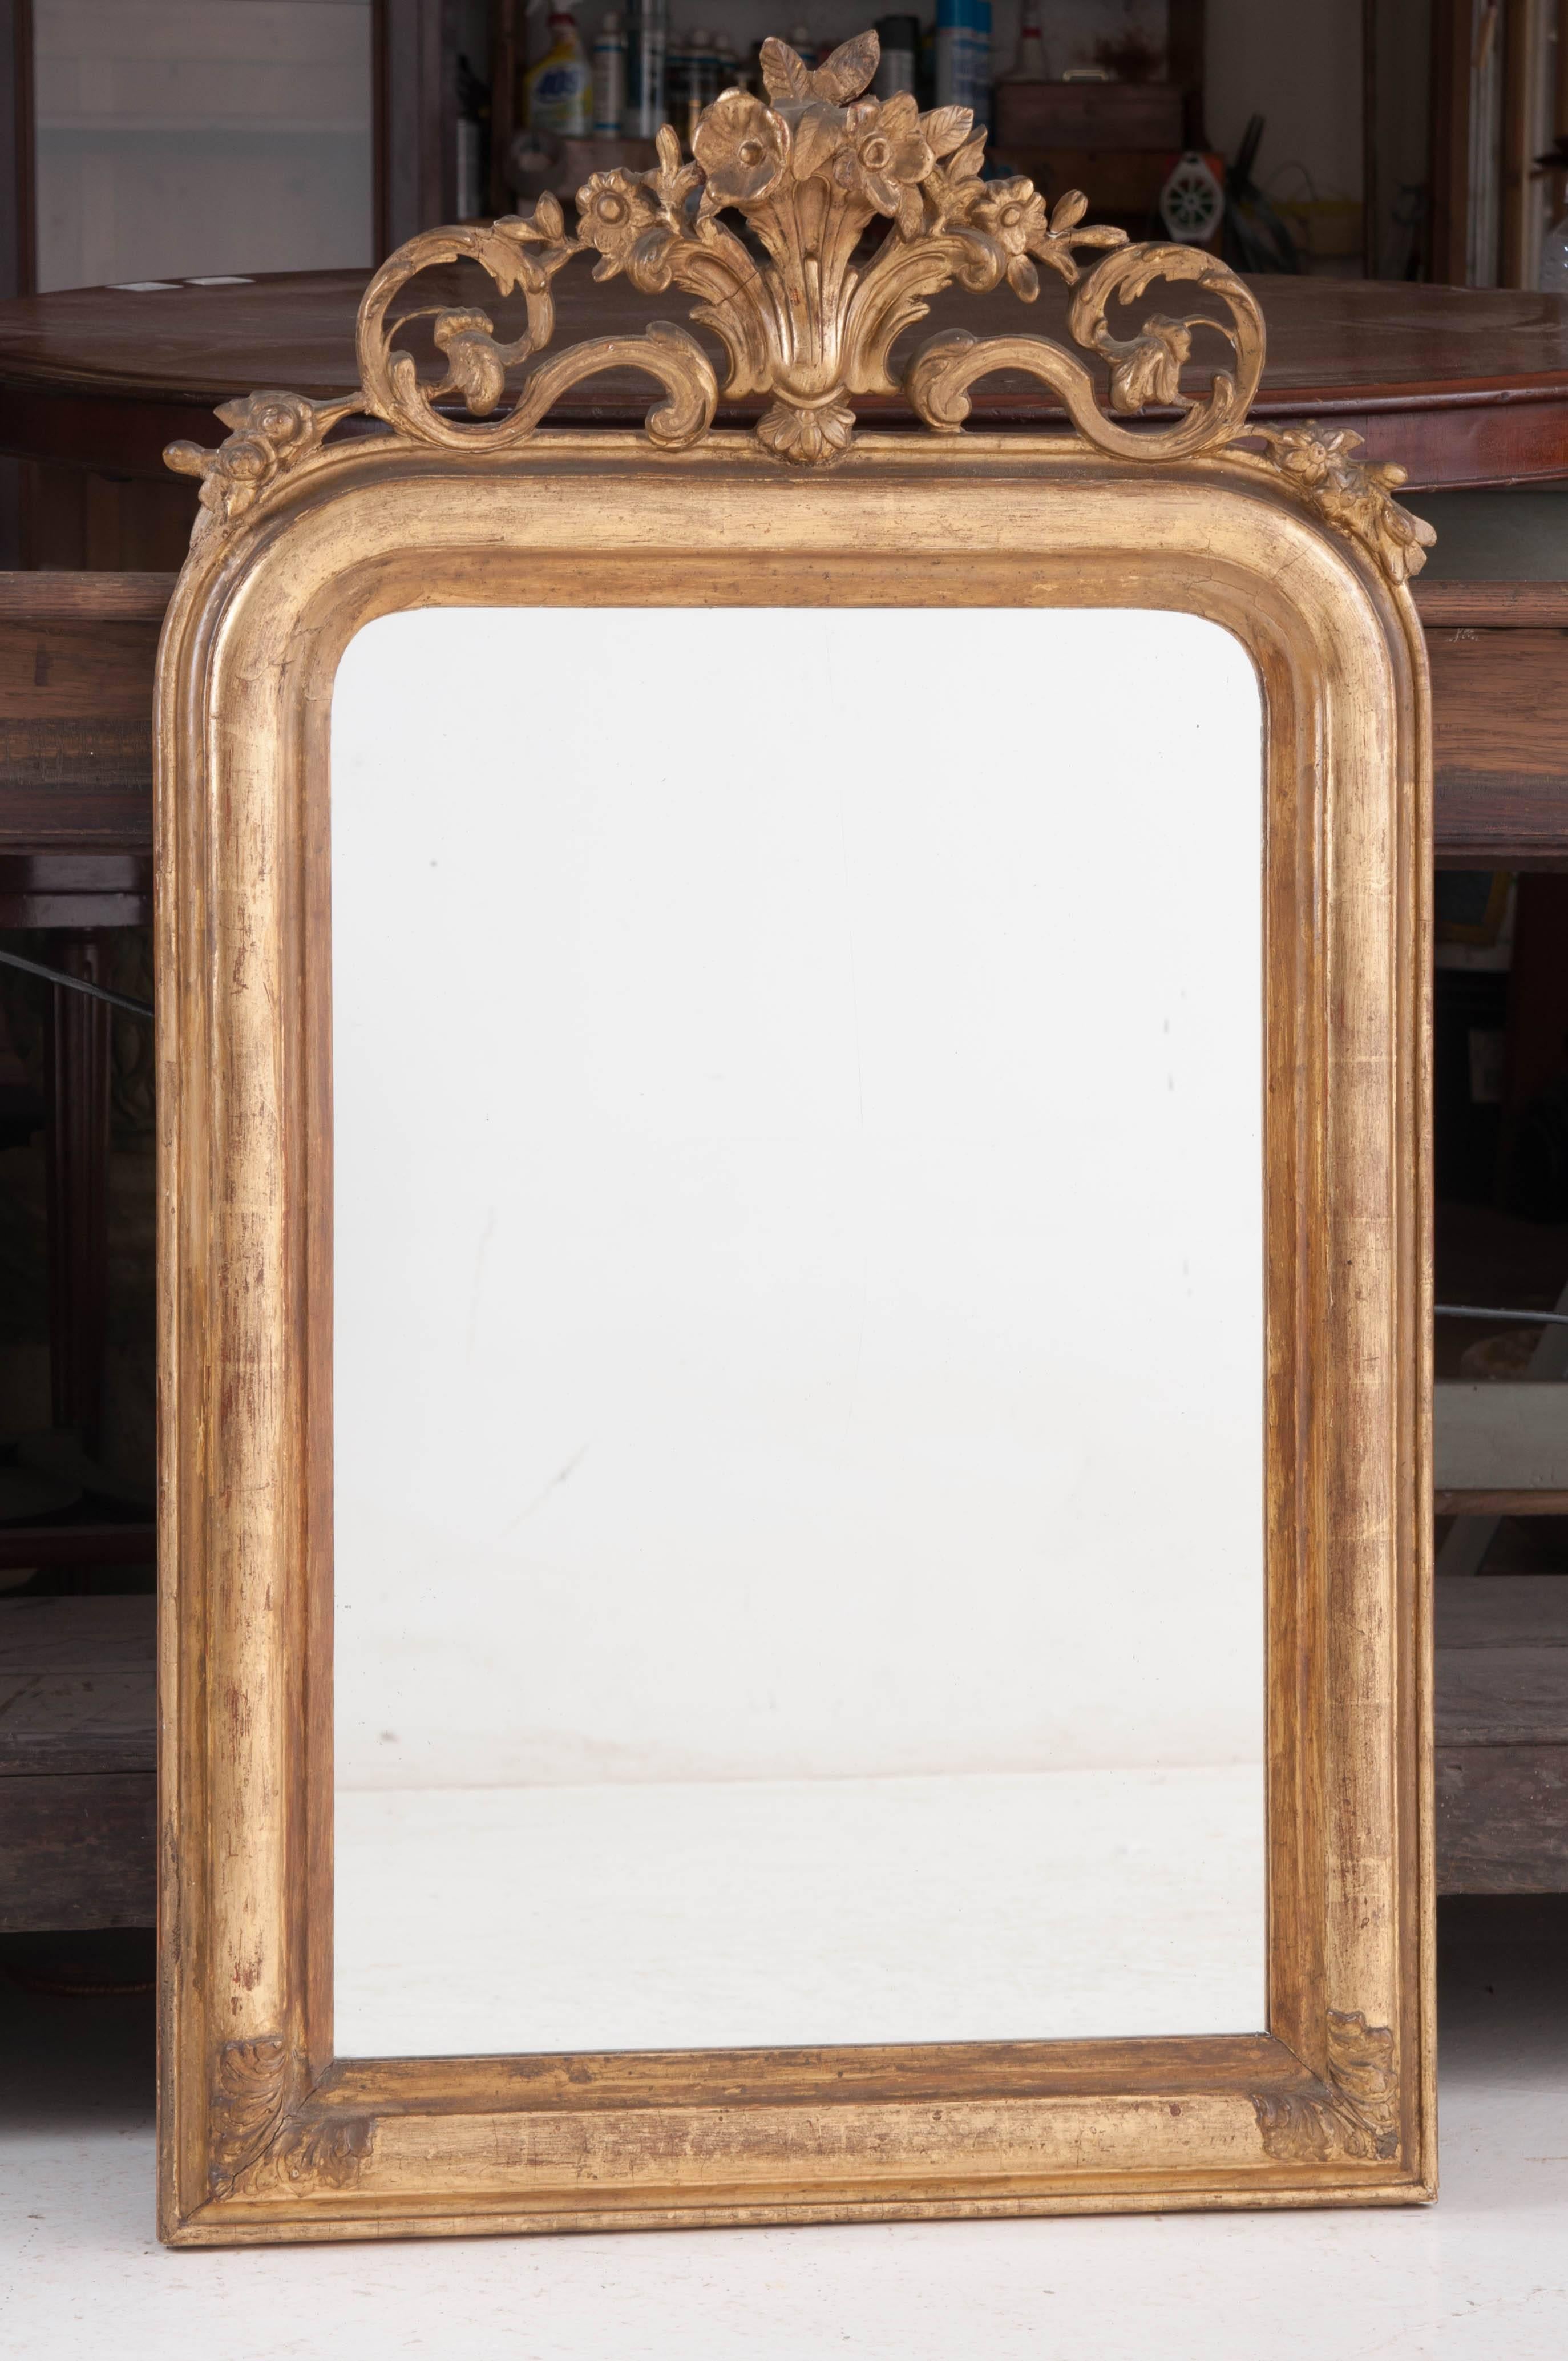 A fabulous gold gilt Louis Philippe mirror with decorative crest from 19th century France. The crest is composed of a floral bouquet that is supported by scrolled, ornate acanthus leaves. The gold gilt frame is free of ornamentation with the